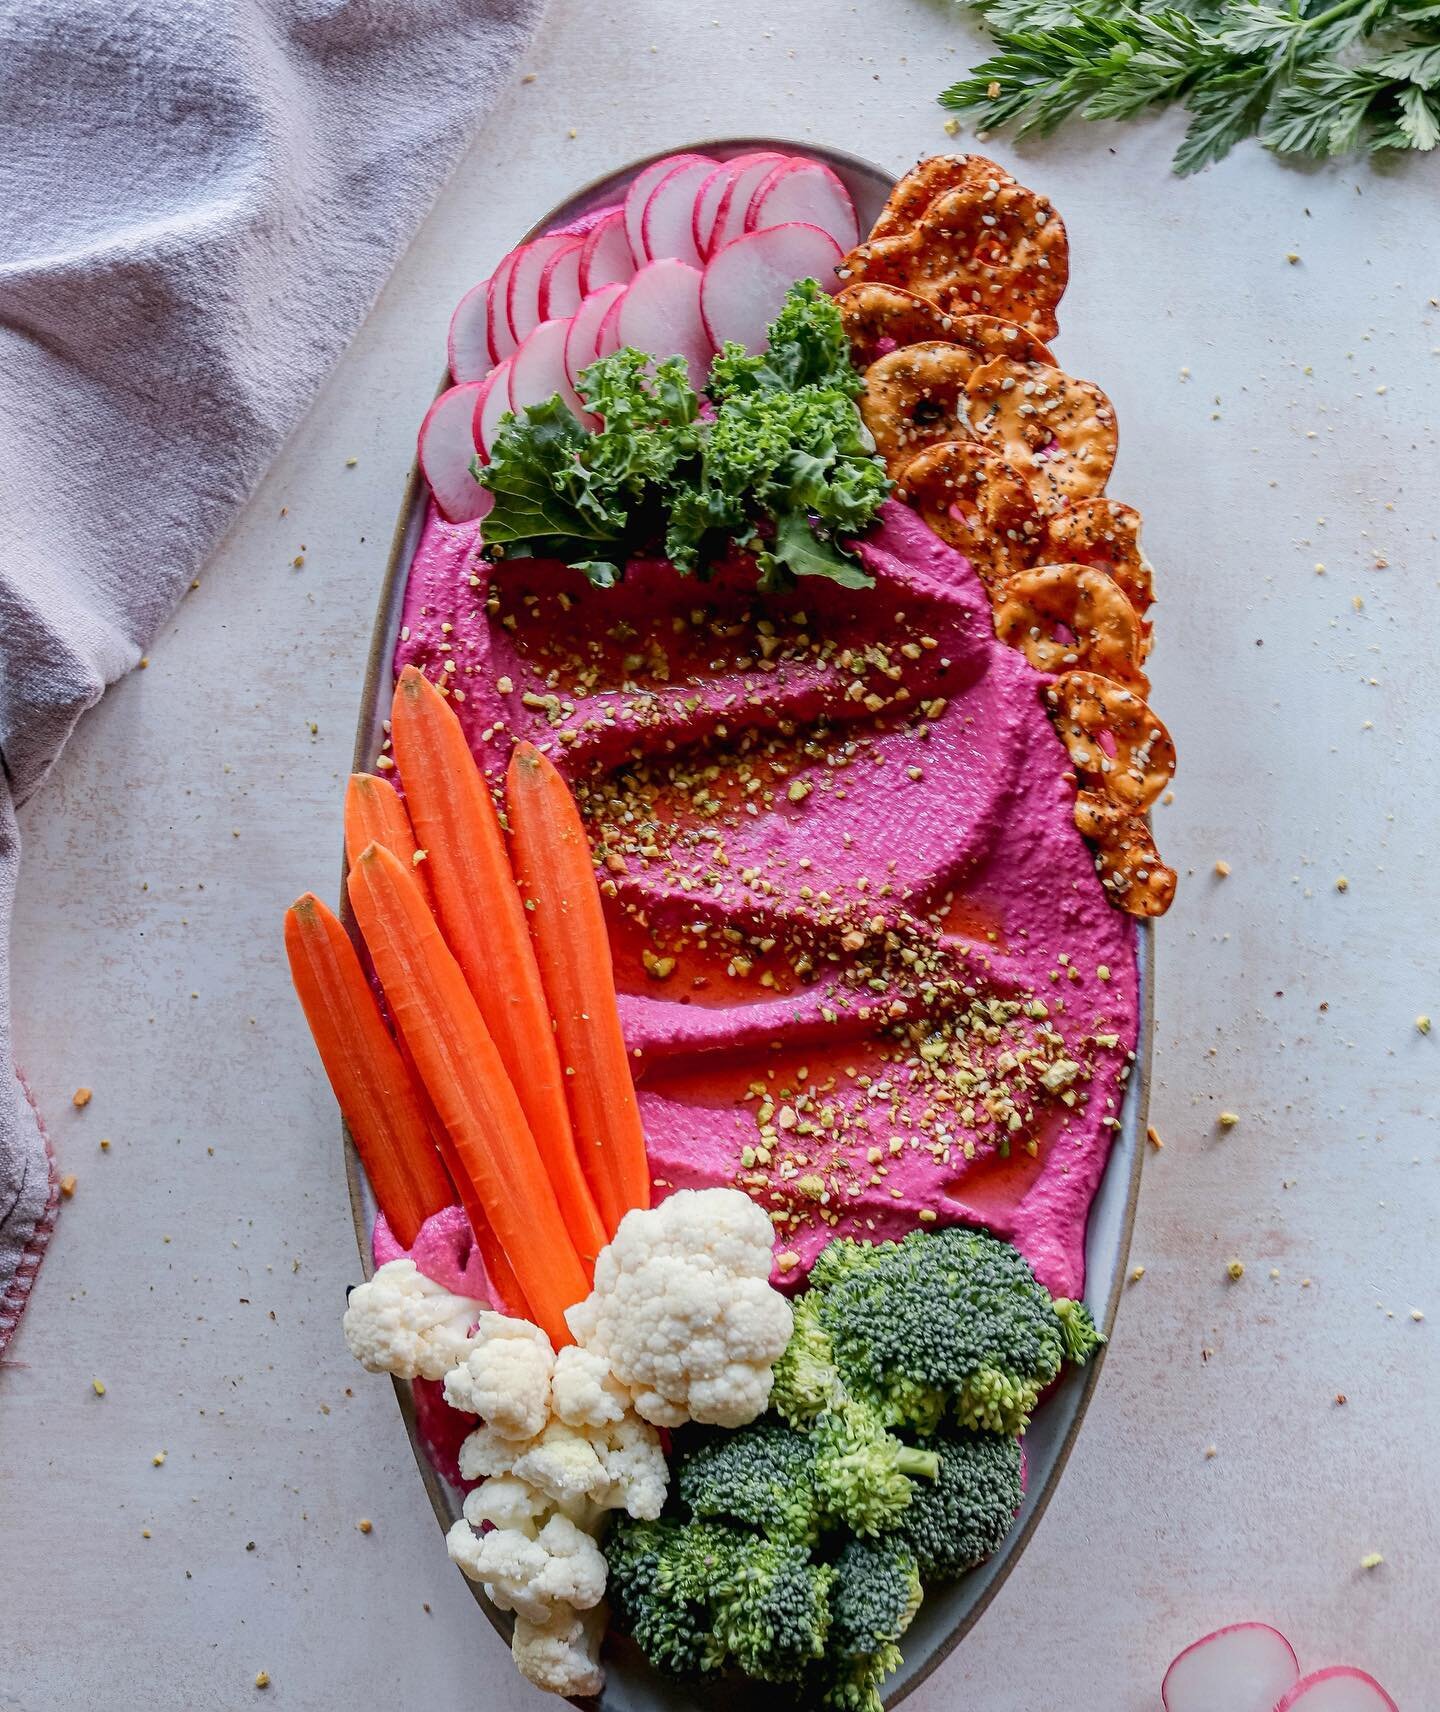 Pretty in pink!

I love this beet hummus for several reasons - easy on the eyes, you get an extra dose of vegetables, and it's absolutely delicious! Hope you're enjoying the warm weather. Cannot wait for Spring!!!

The recipe is on Grublisher!